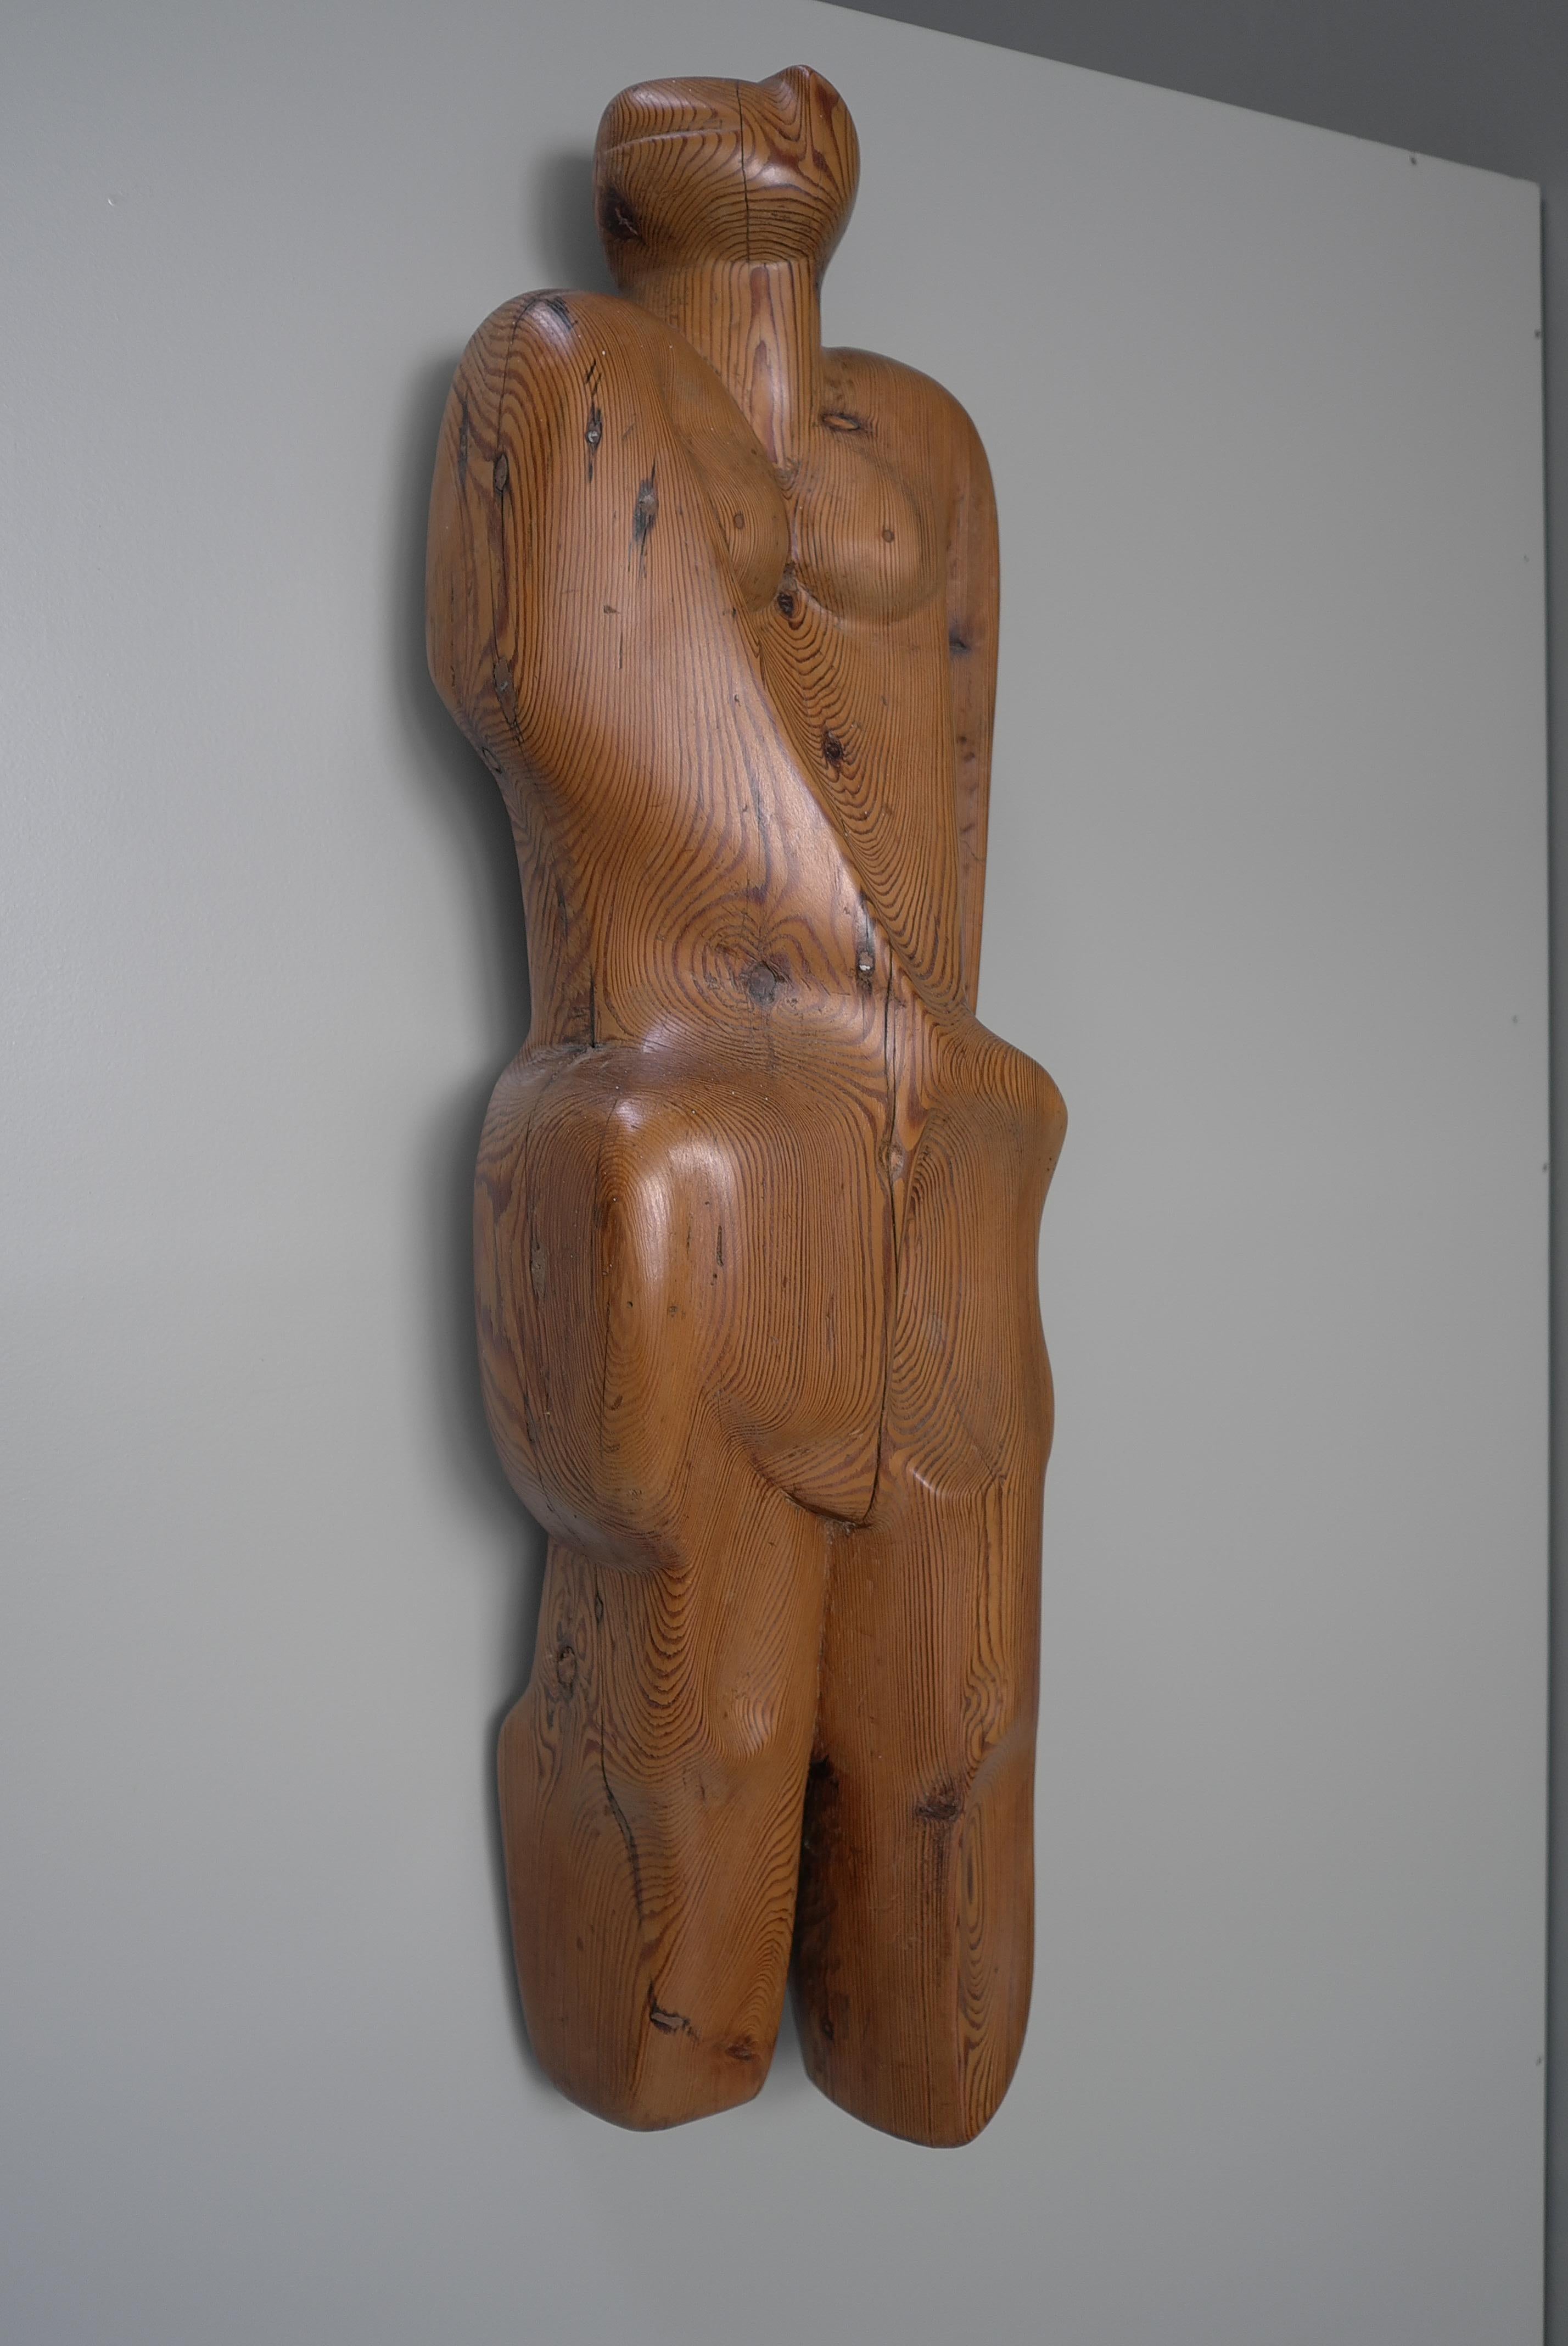 Abstract Wooden Wall Art , Women Figure by Cor Dam, Delft The Netherlands 1958 For Sale 4